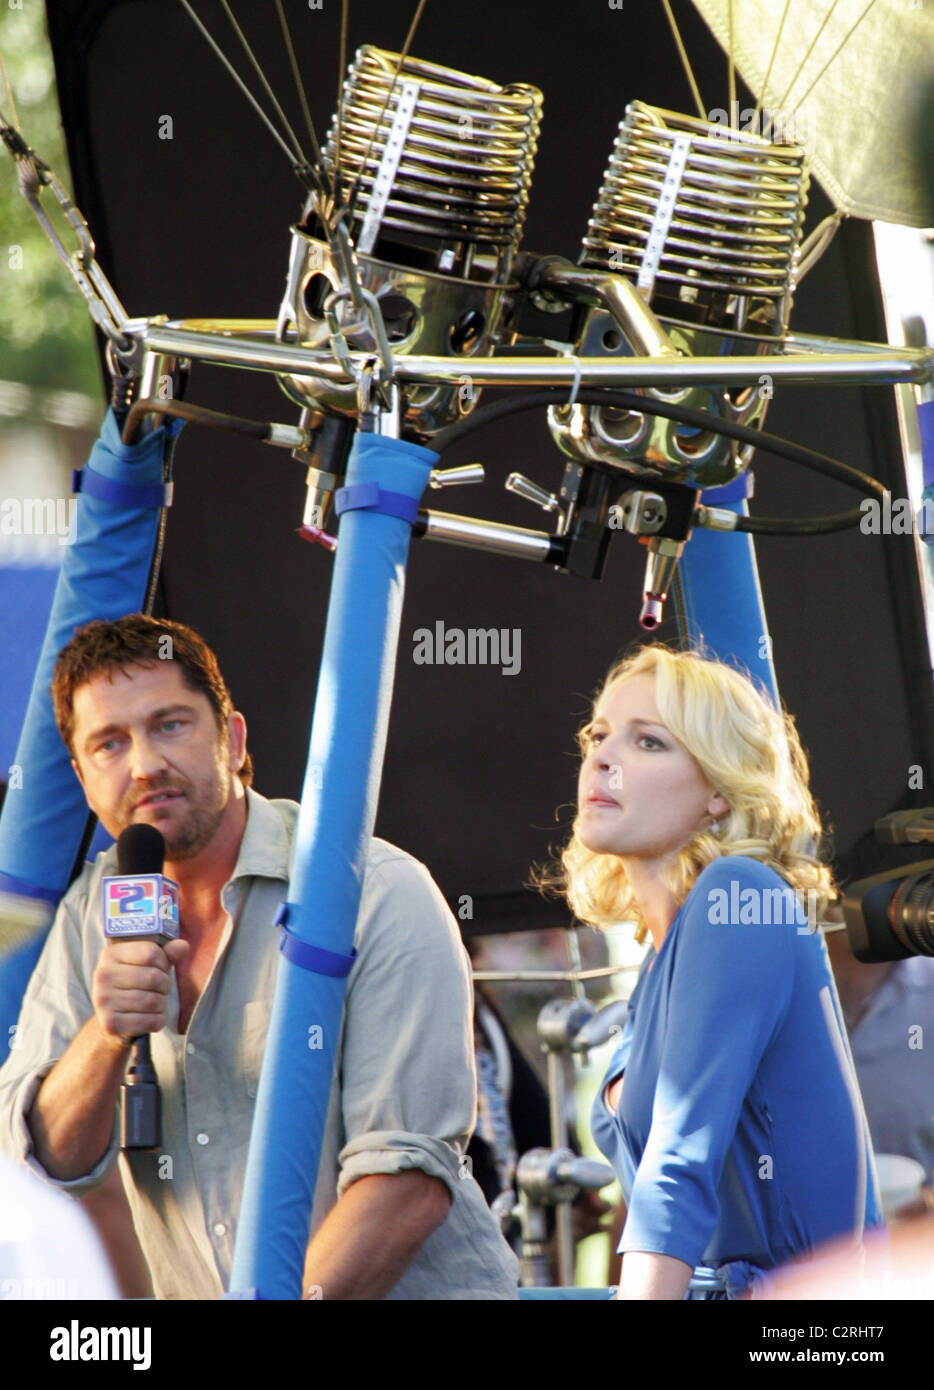 Gerard Butler and Katherine Heigl on the set of their upcoming movie 'The  Ugly Truth' filming on location in a hot air balloon Stock Photo - Alamy